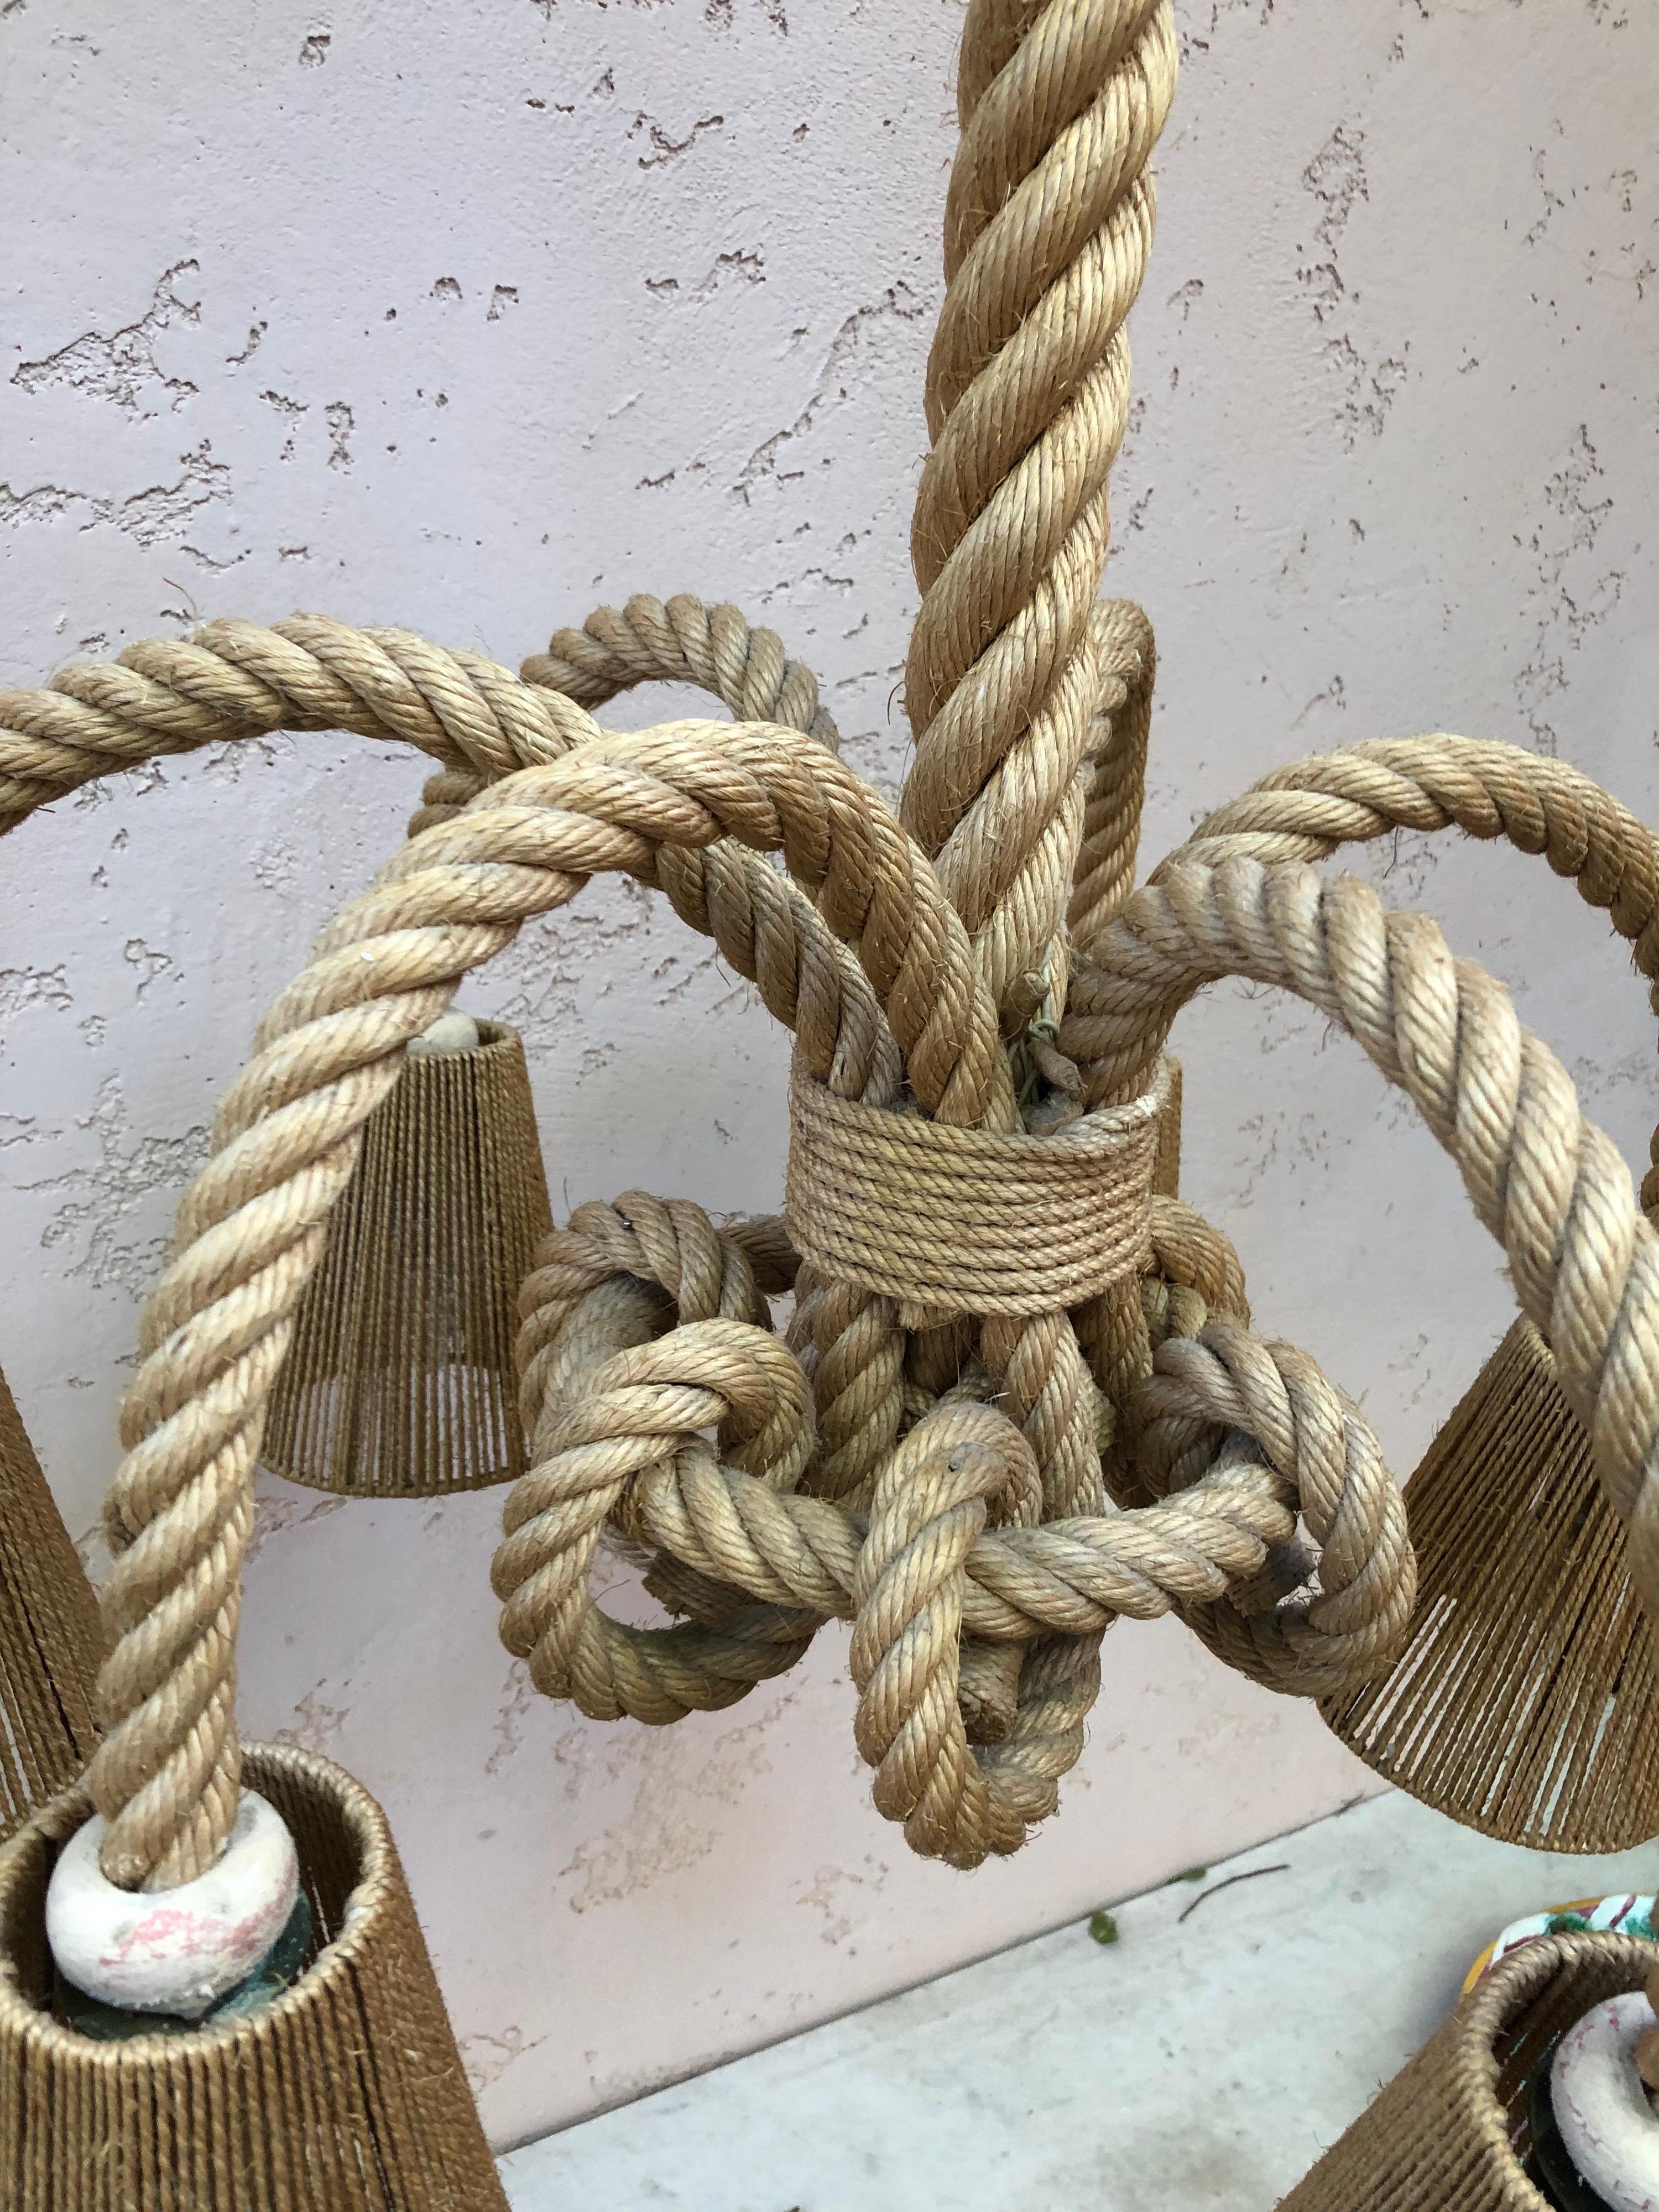 Large exceptional 6 arms rope chandelier Audoux Minet, circa 1960.
Measure: 26 inches diameter.
29 inches height total.
Nautical style.